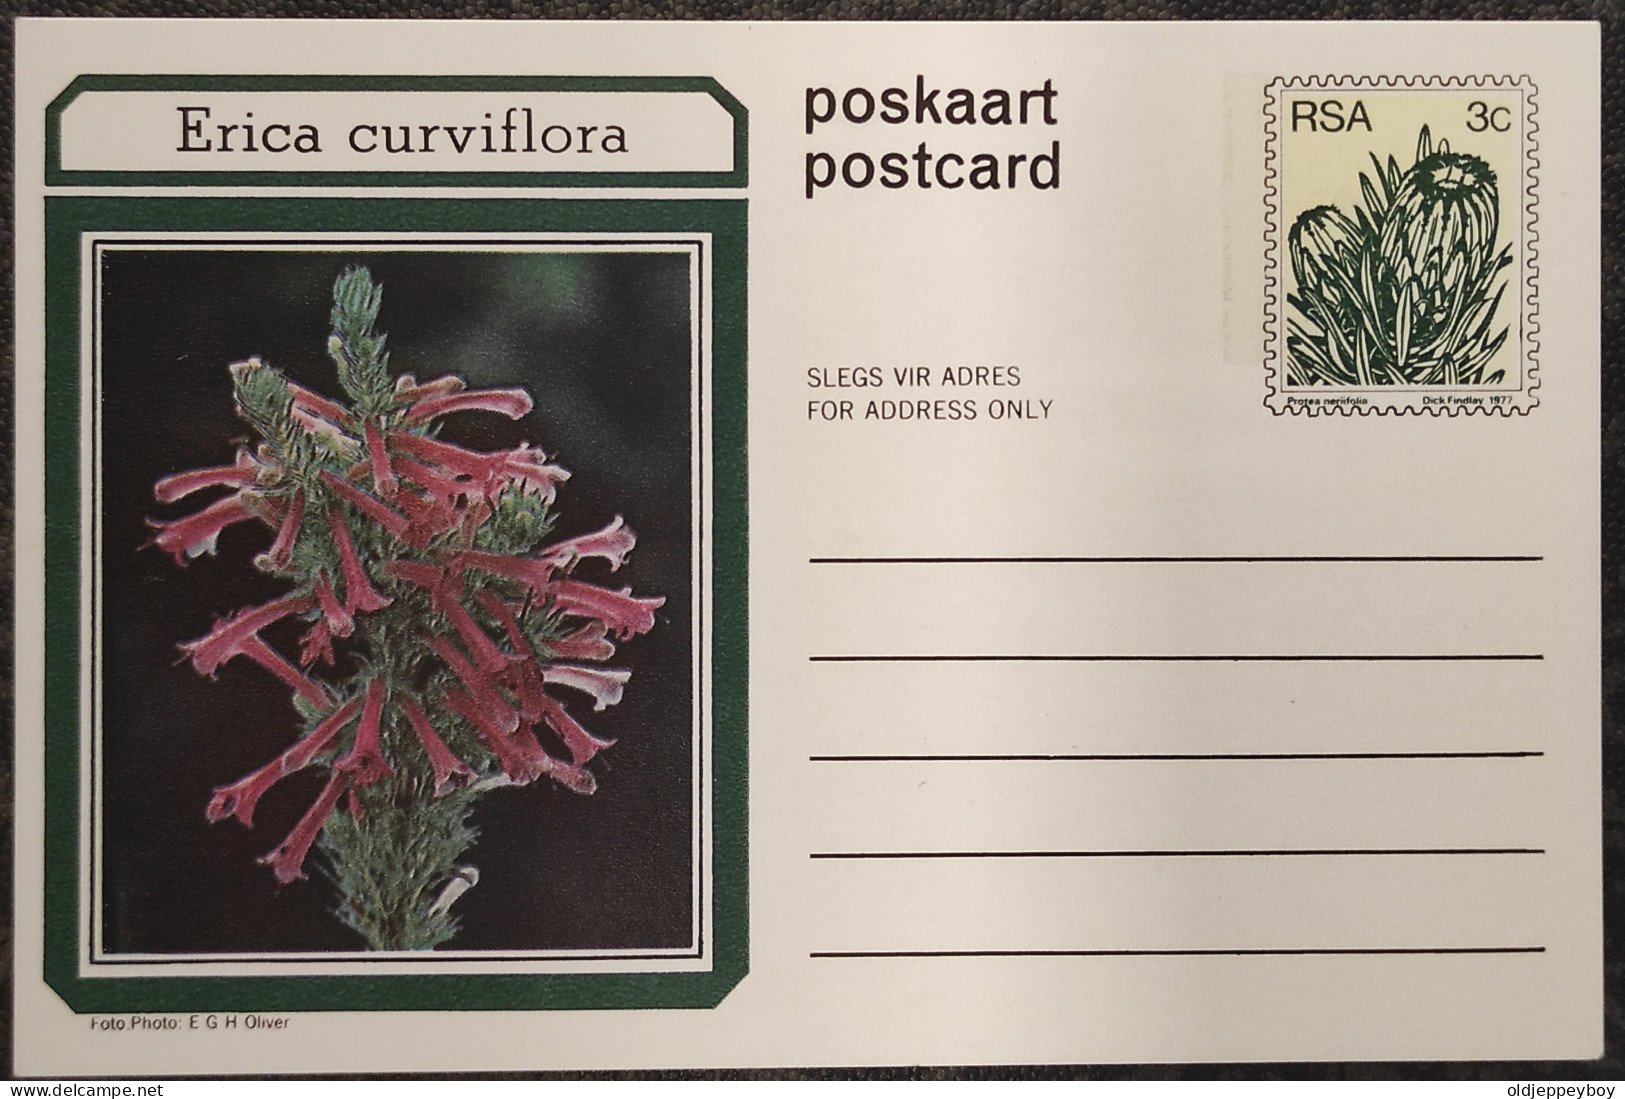 3c SOUTH AFRICA Postal STATIONERY CARD Illus ERICA CURVIFLORA FLOWER Cover Stamps Flowers Rsa - Covers & Documents